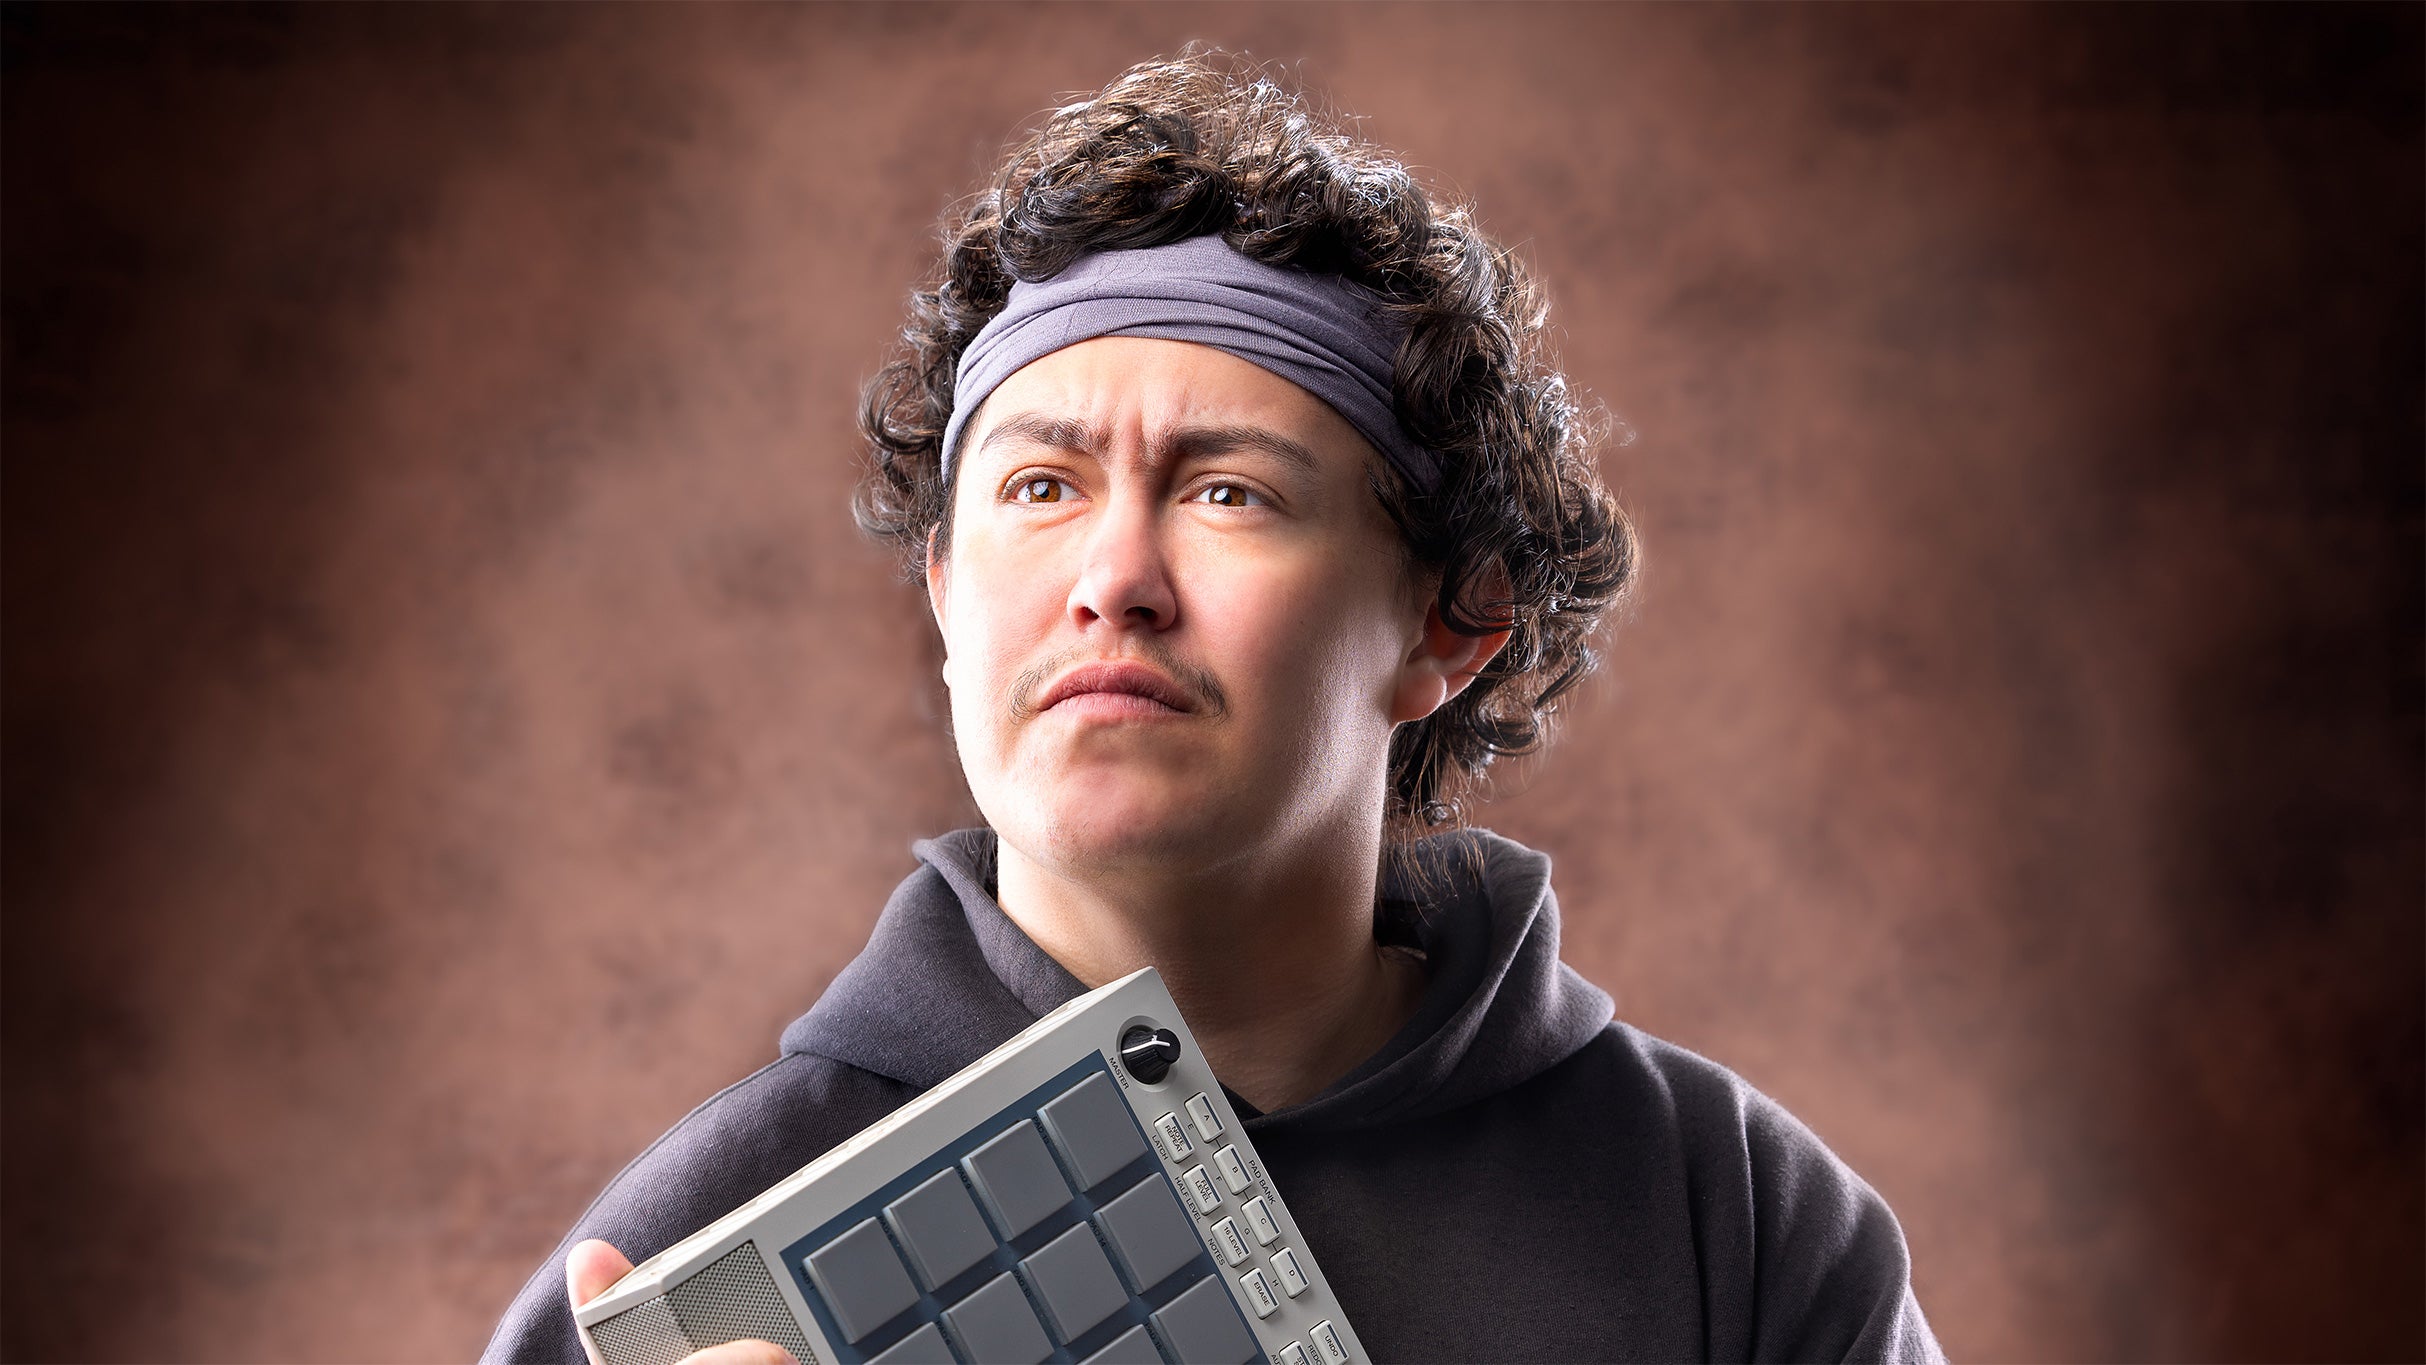 new presale code for Hobo Johnson advanced tickets in Philadelphia at The Foundry